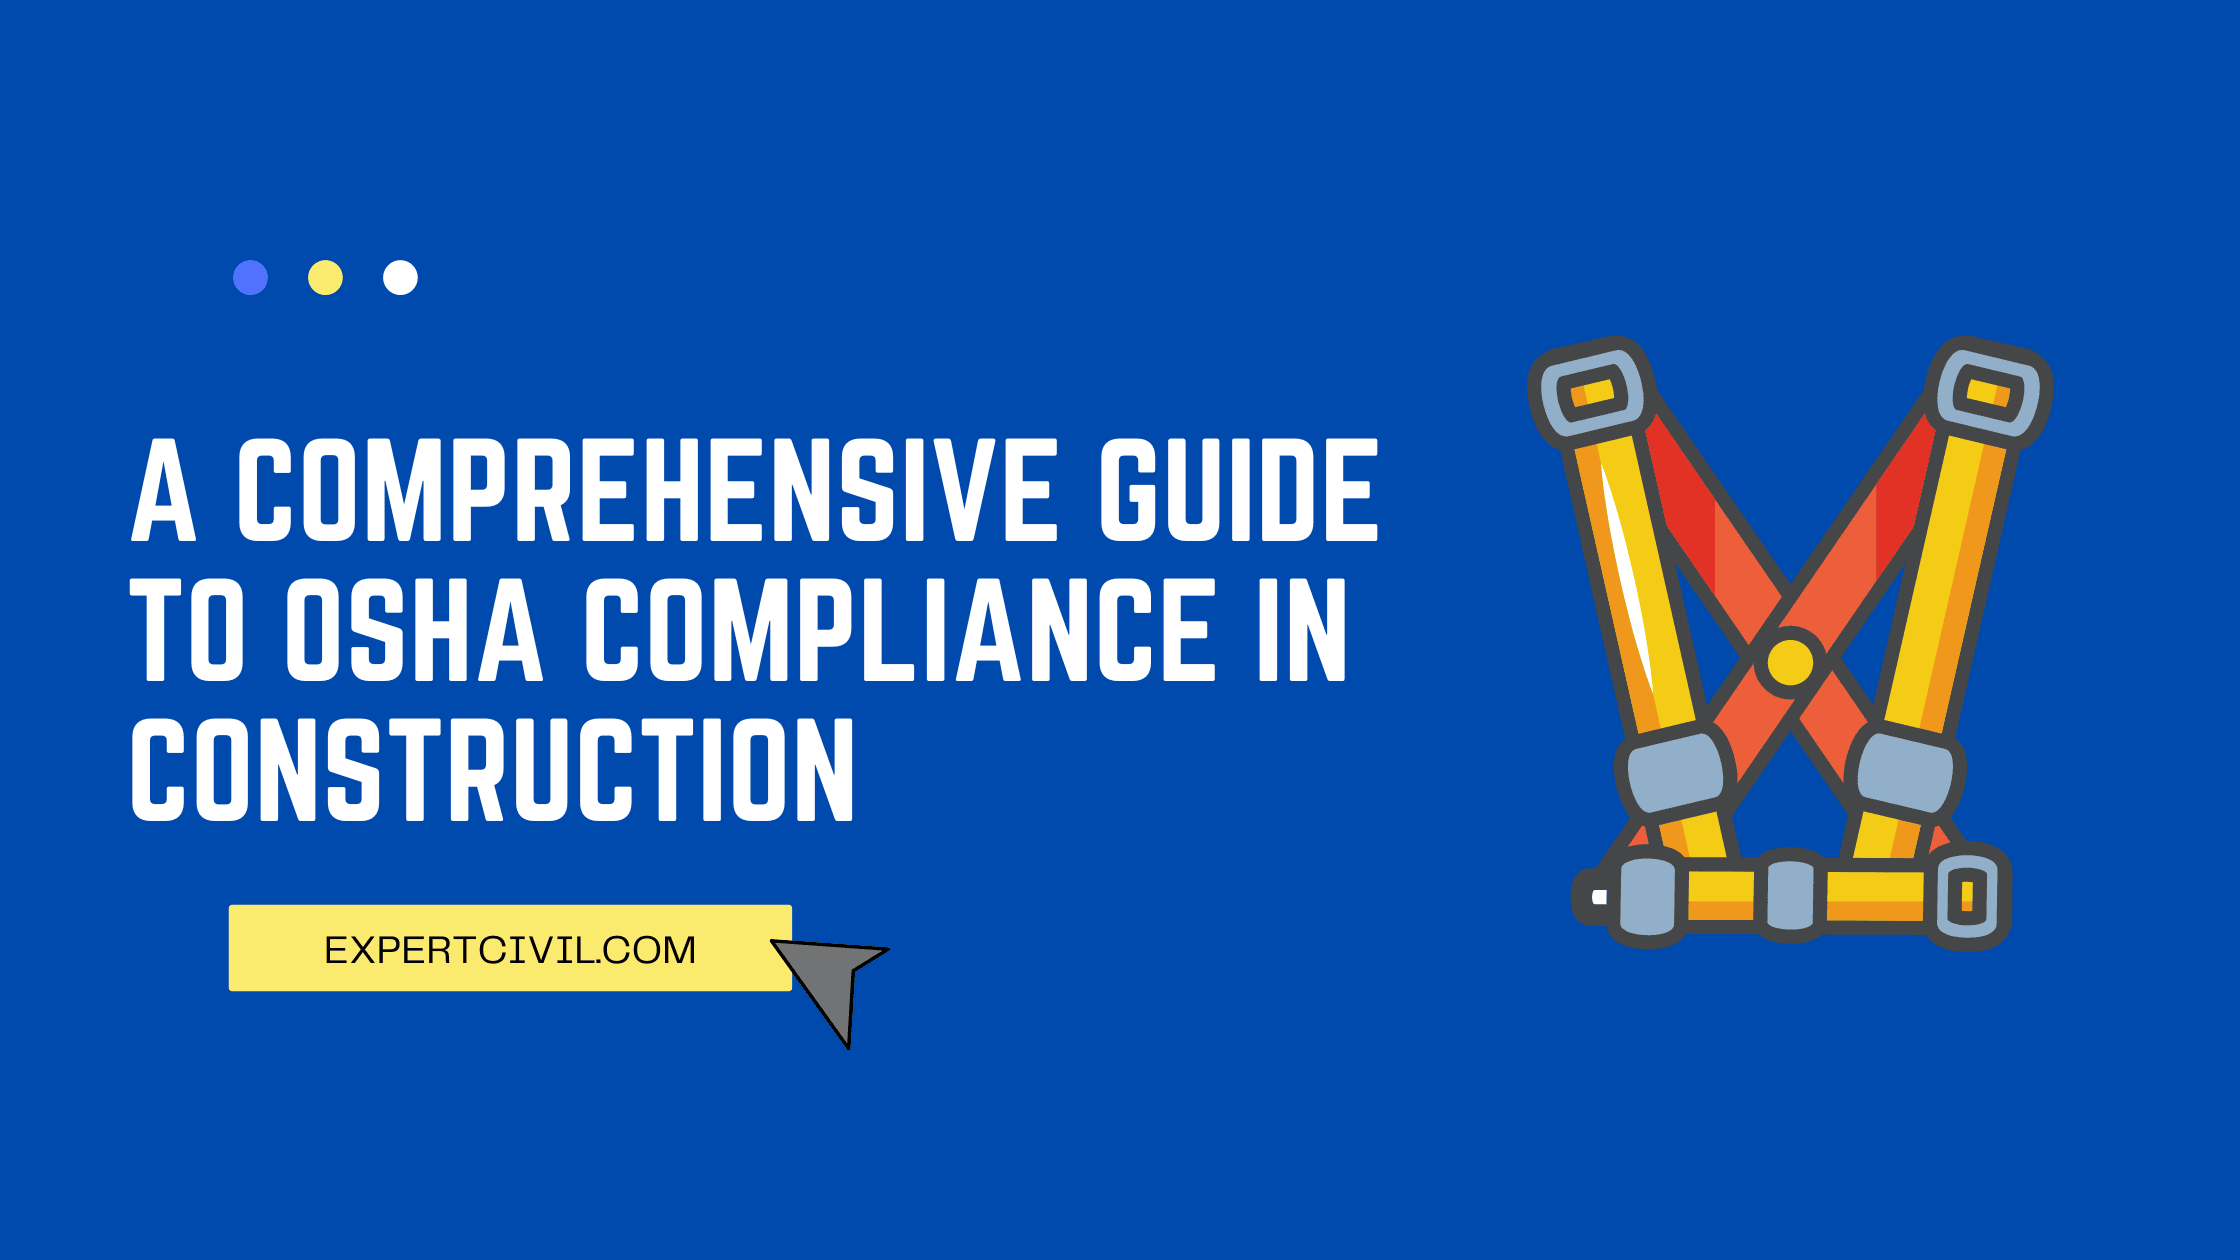 A Comprehensive Guide to OSHA Compliance in Construction: Tips for Employers